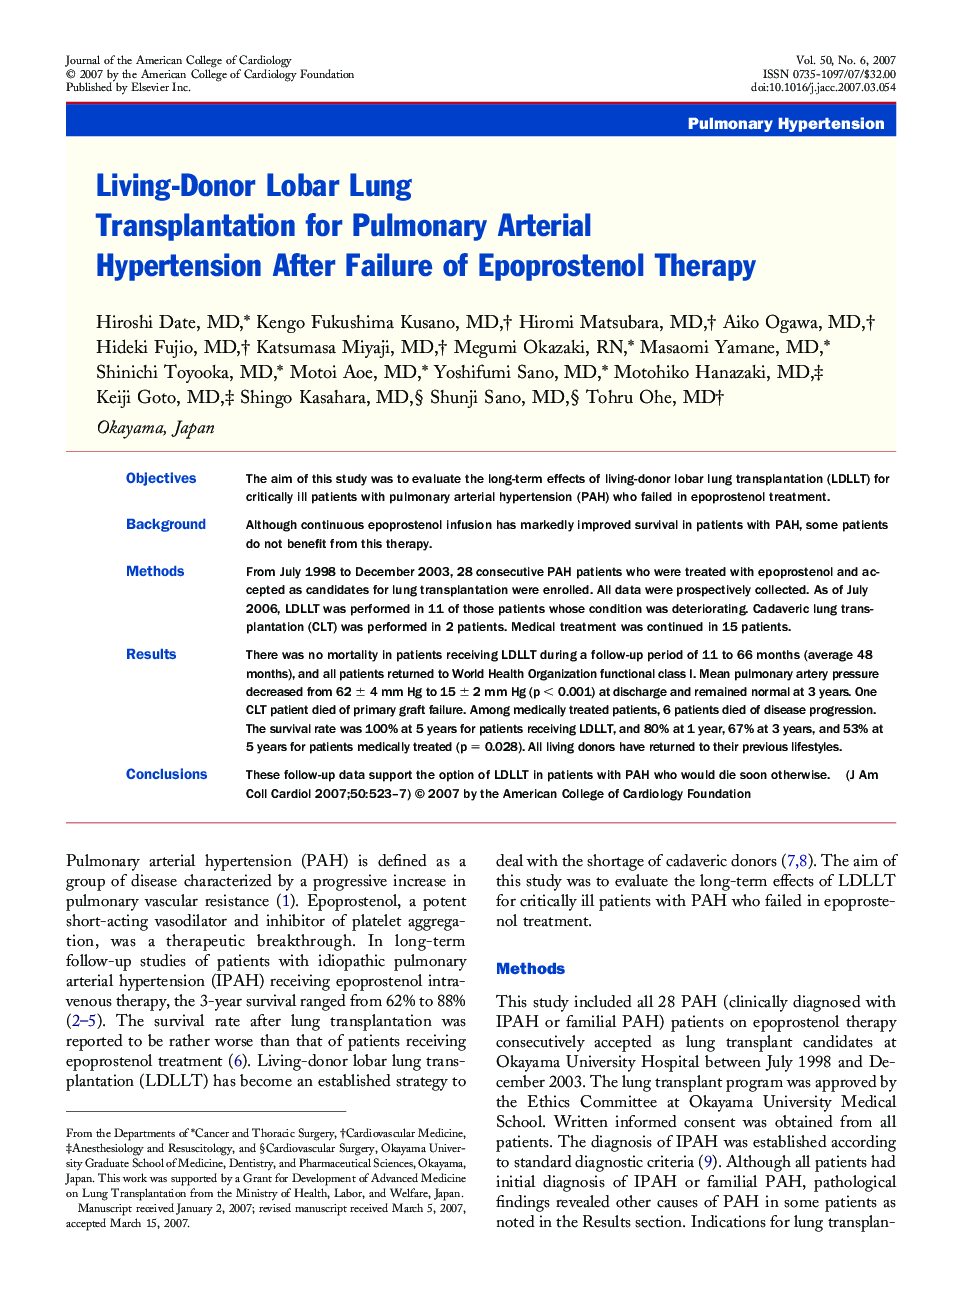 Living-Donor Lobar Lung Transplantation for Pulmonary Arterial Hypertension After Failure of Epoprostenol Therapy 